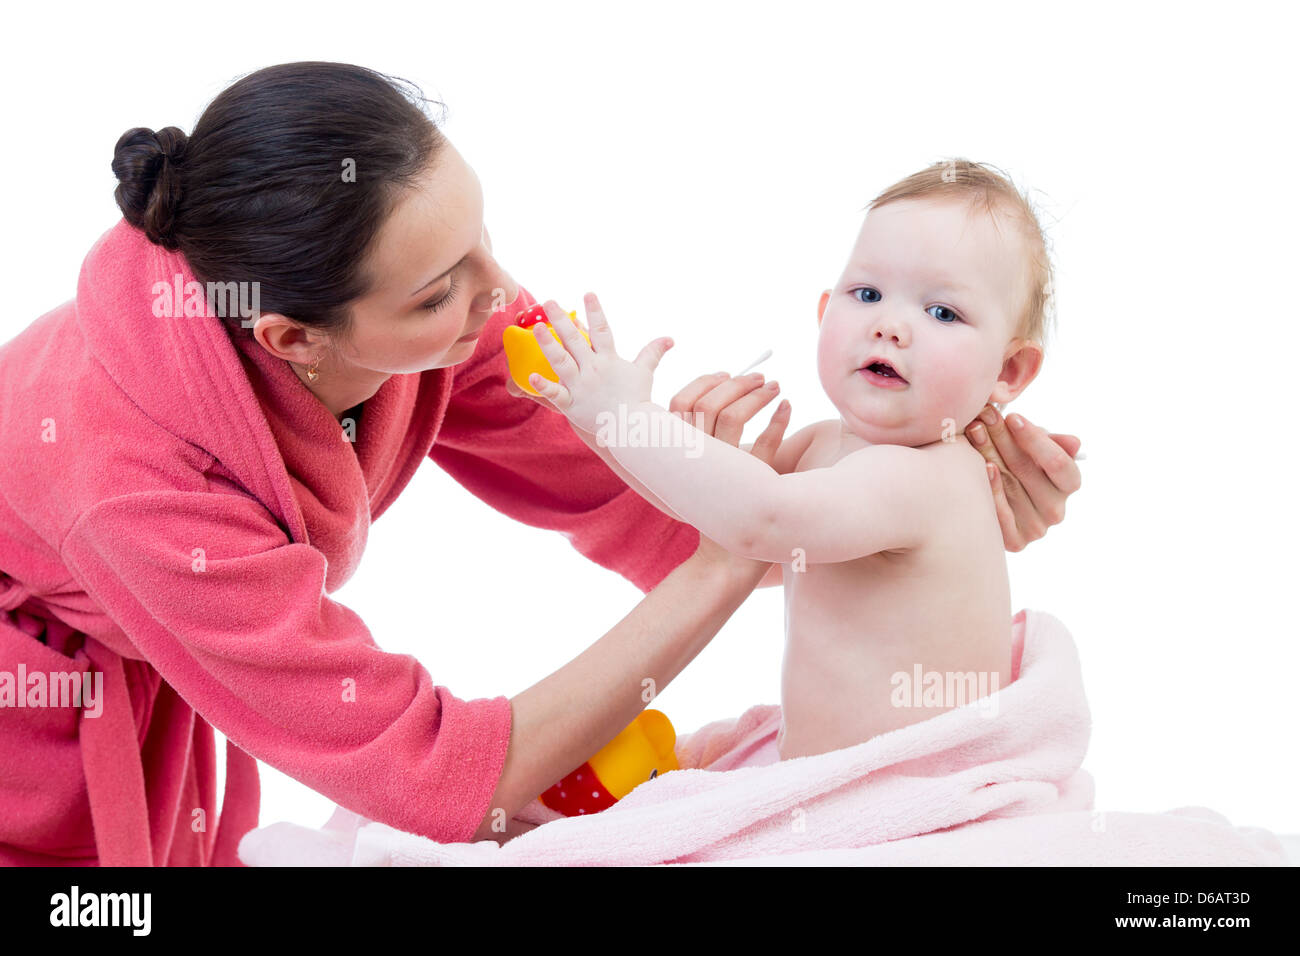 baby hygiene after bathing Stock Photo